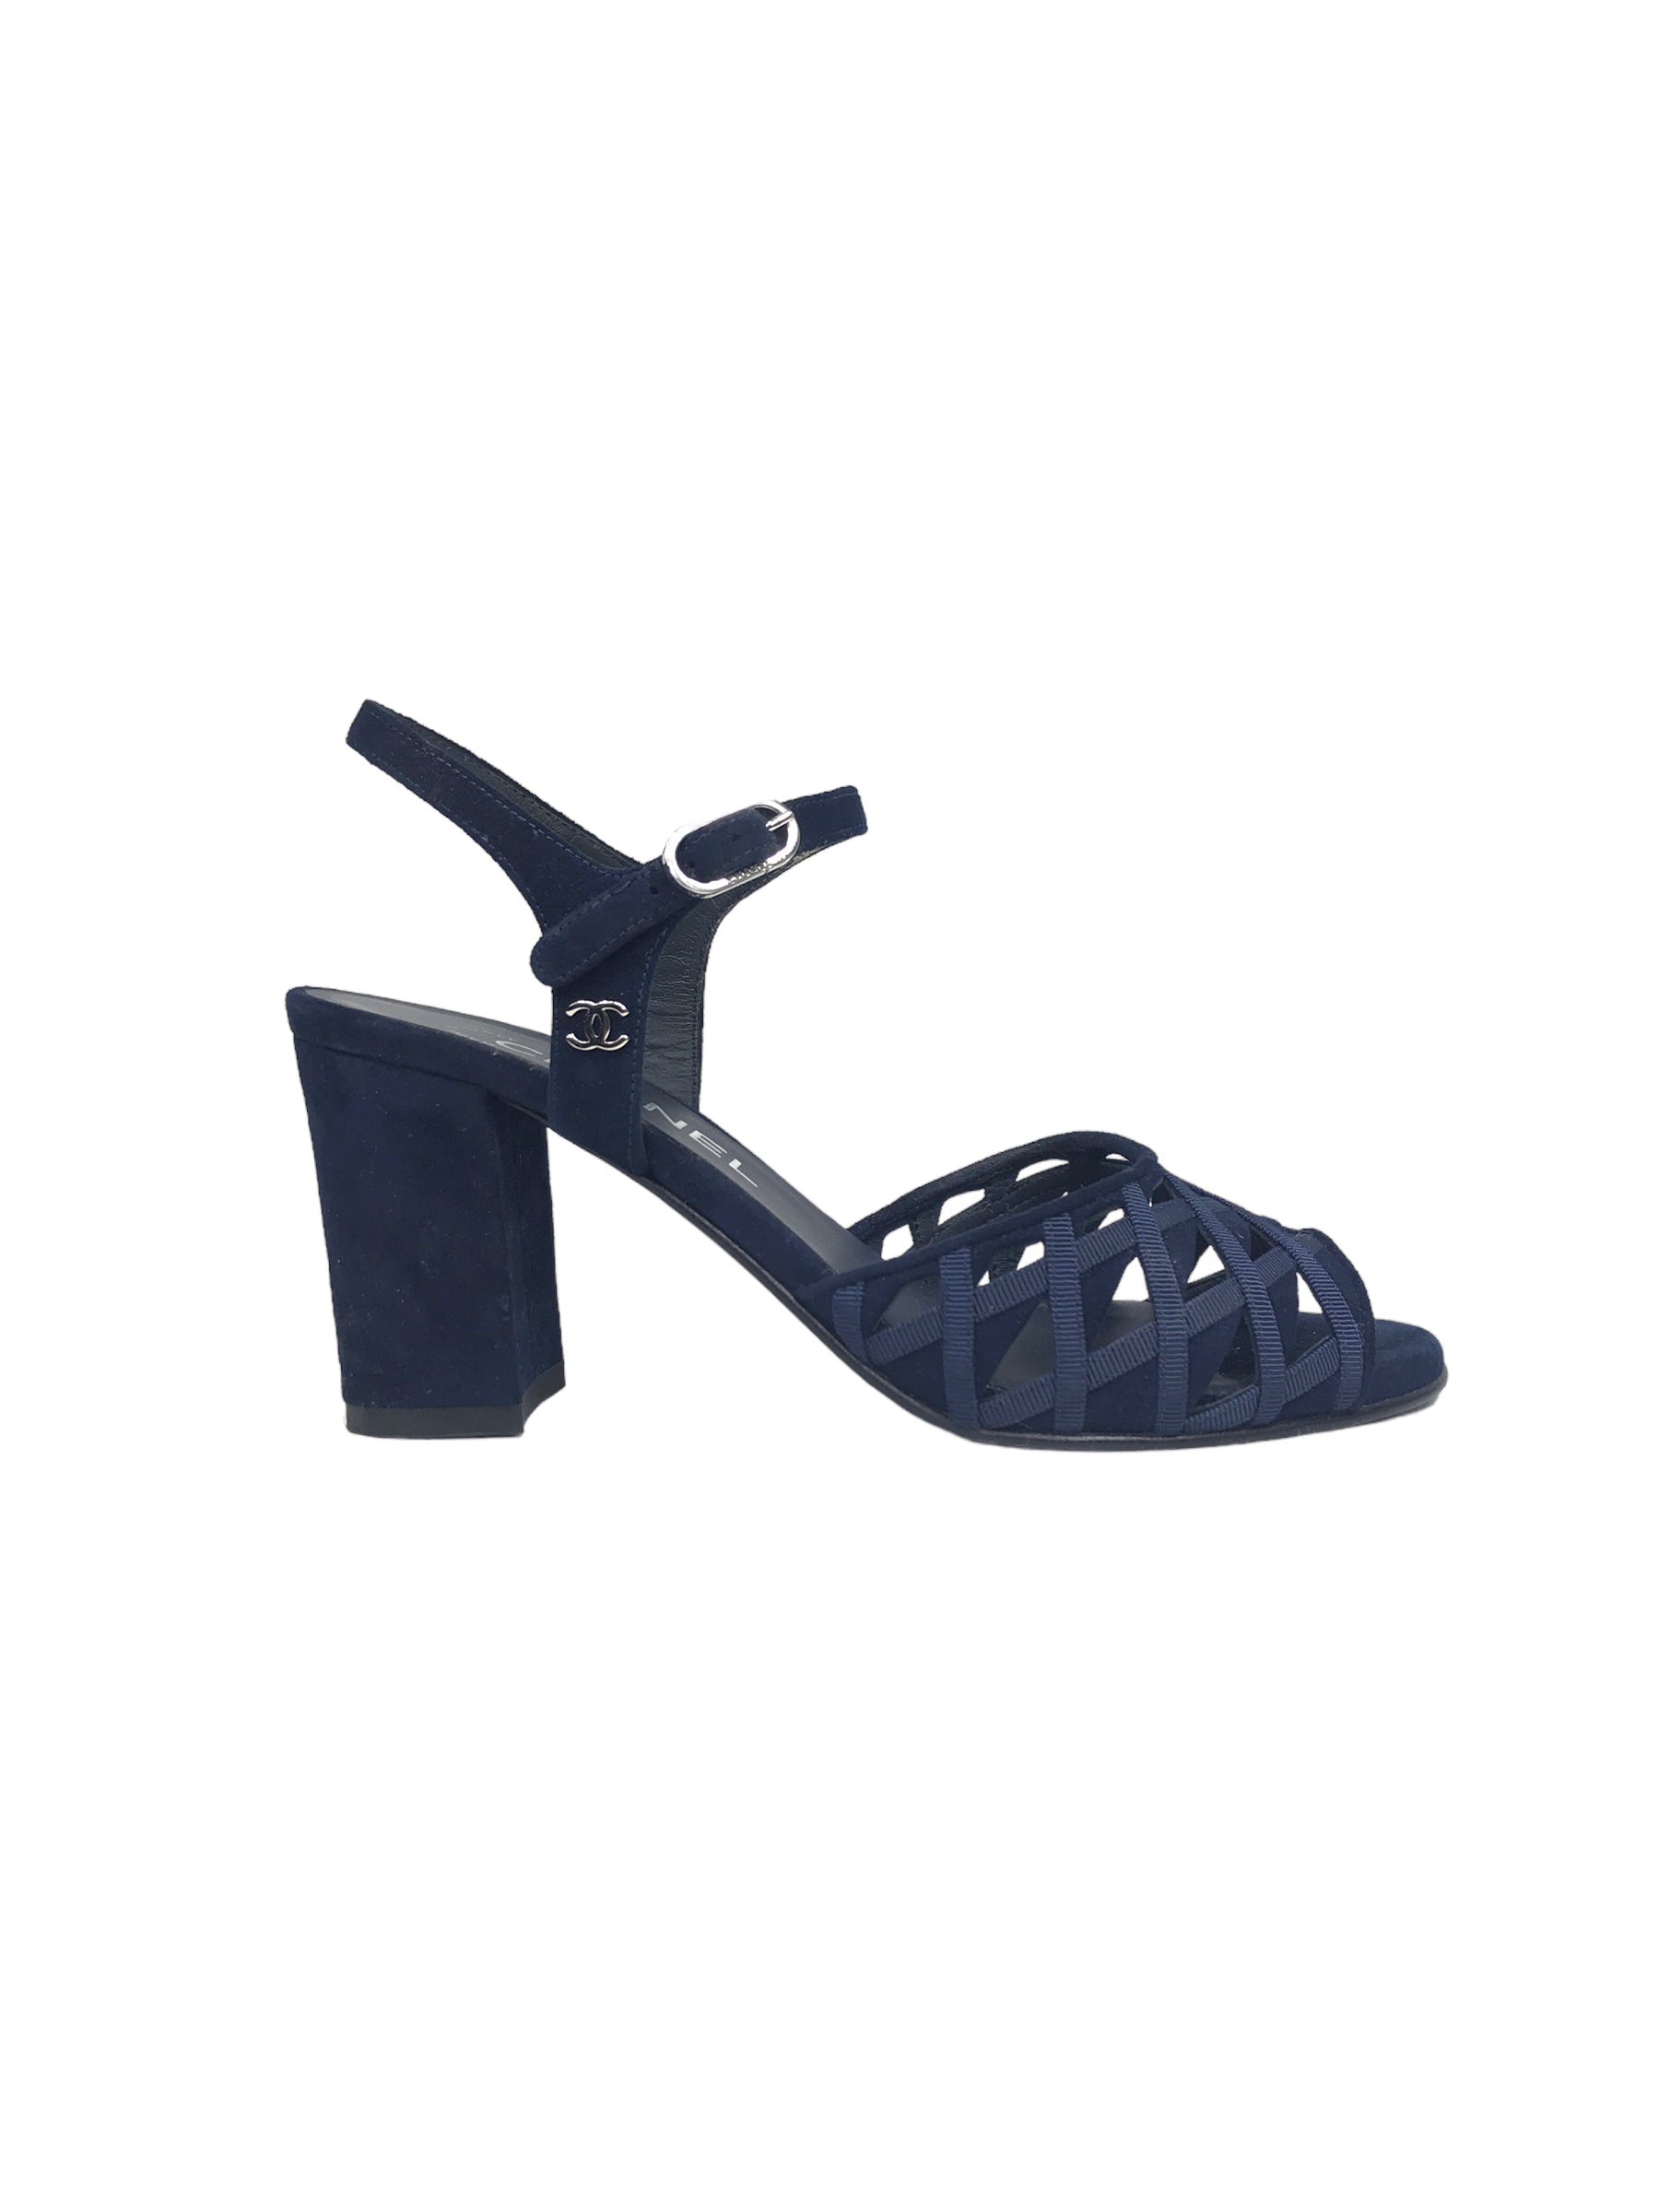 Navy Blue Suede Strappy Heeled Sandals W/SHW